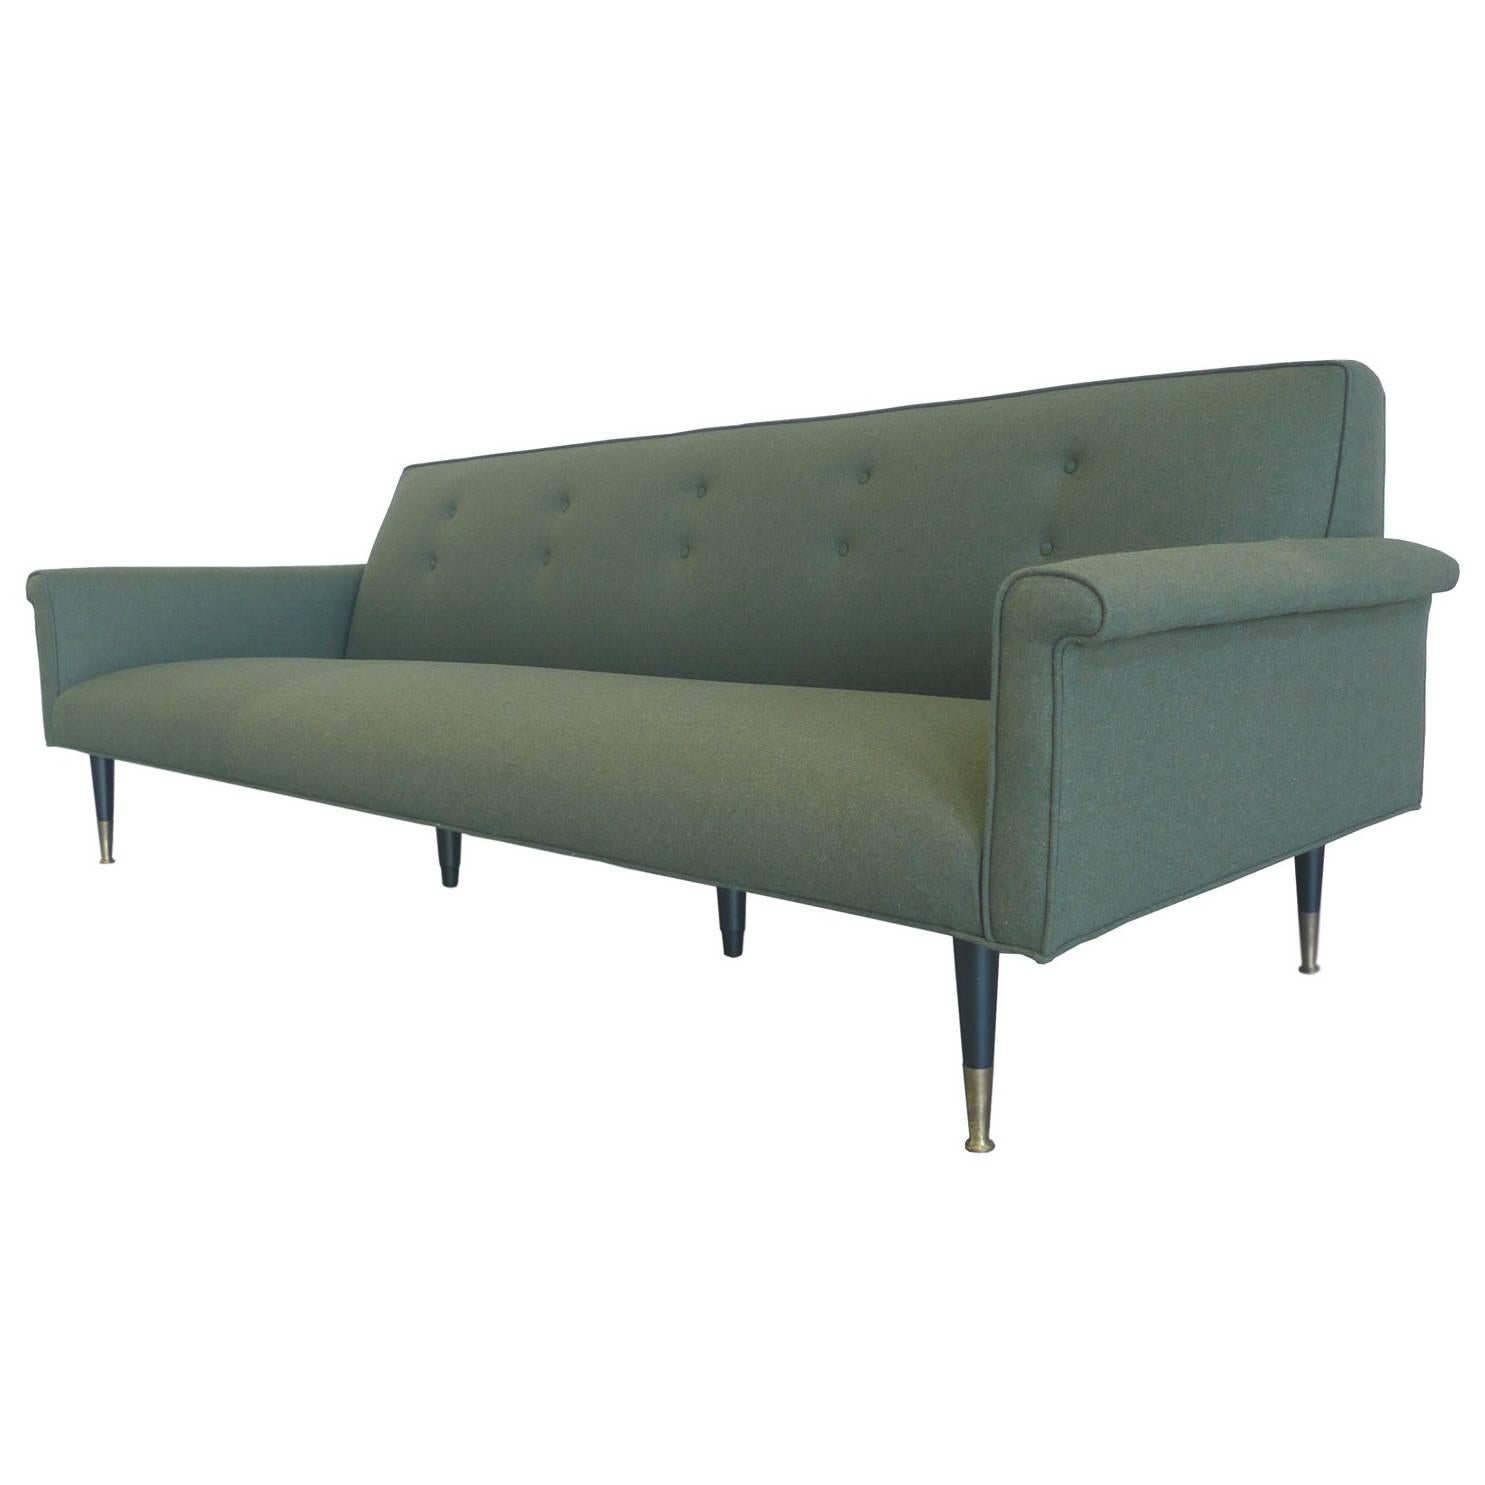 1960s Reupholstered Green Wool Sofa in the Style of Edward Wormley